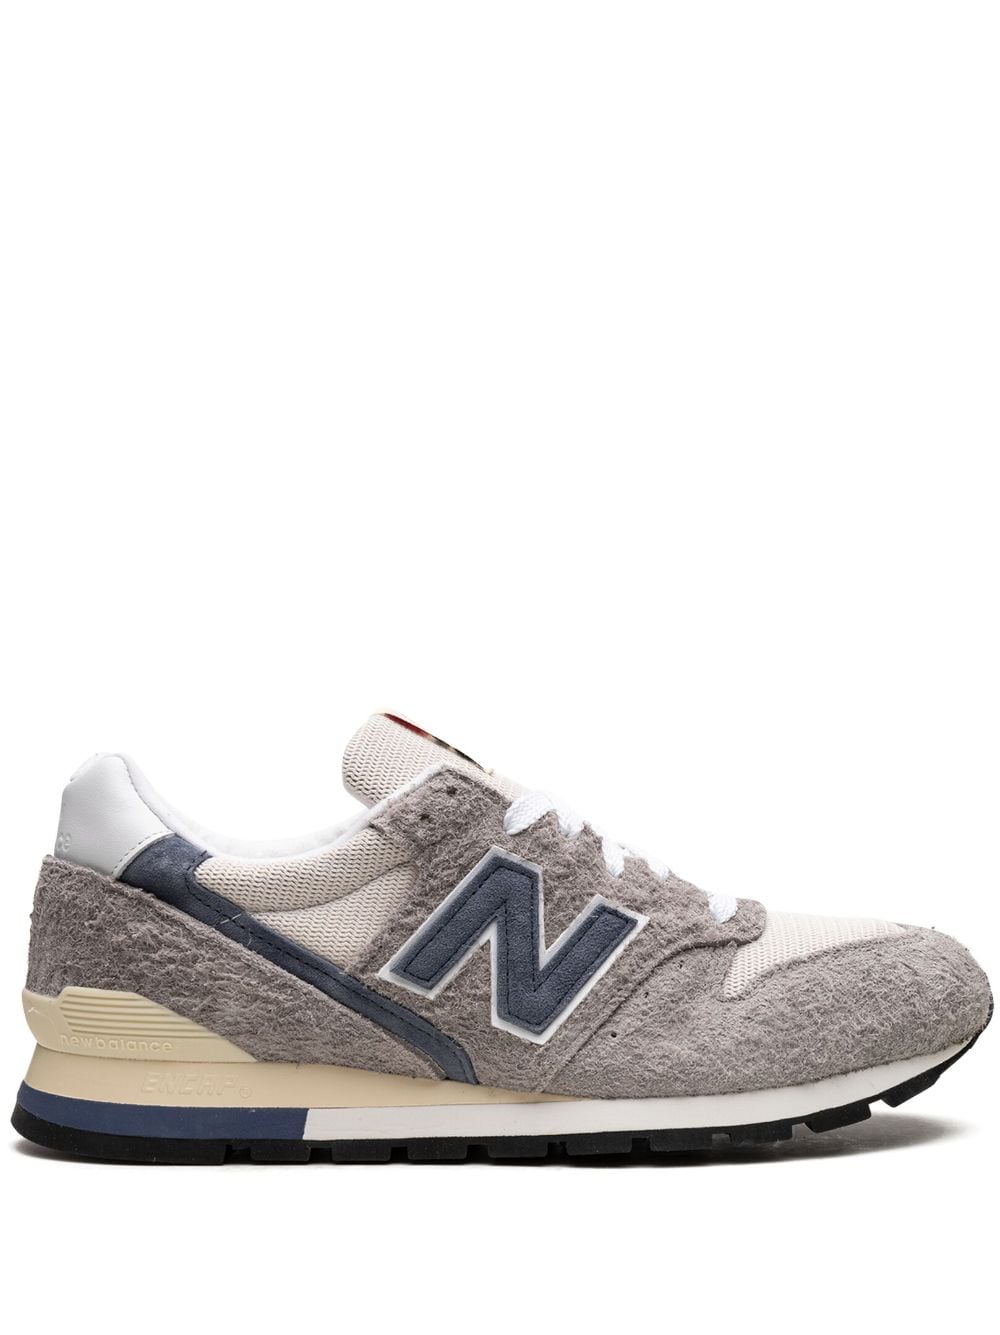 New Balance Made in Usa 996 ''Grey/Navy" sneakers